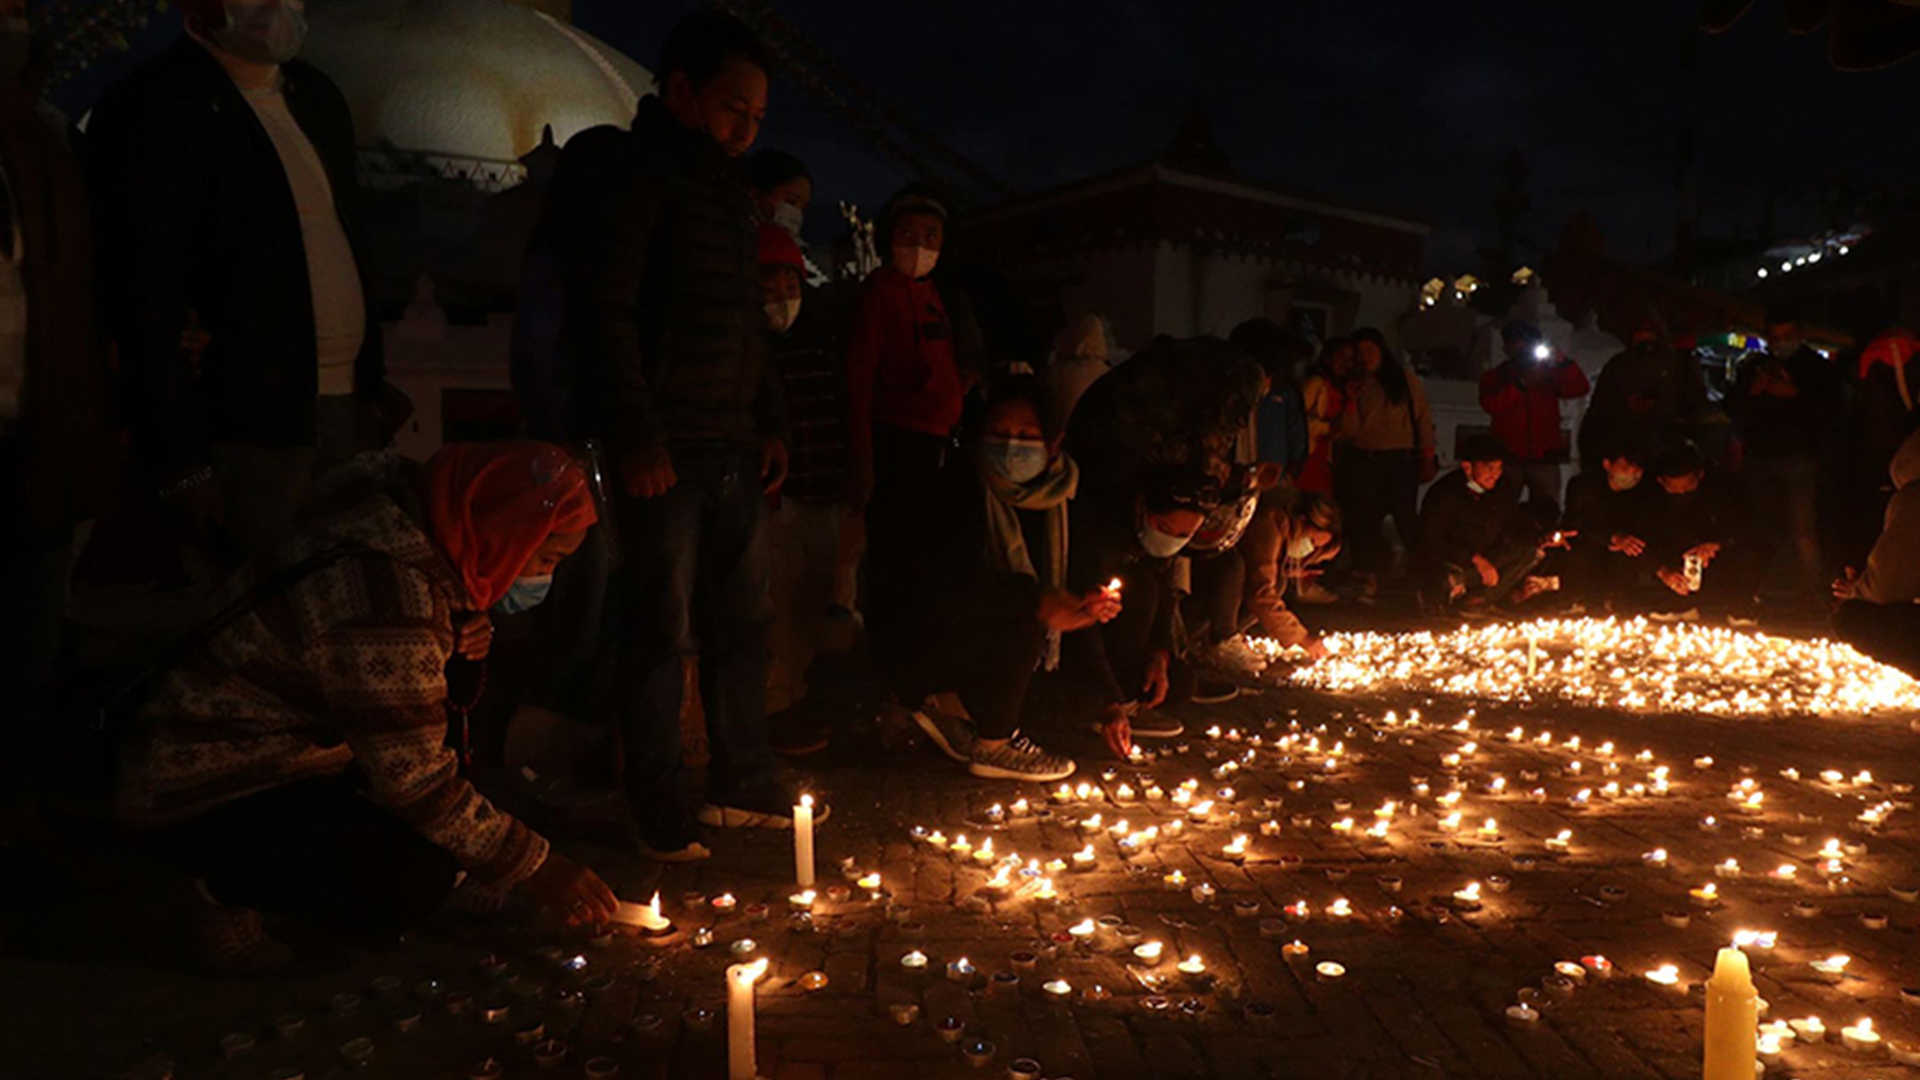 A lamp-lighting program was held in protest against the campaign to save the Swayambhu World Heritage Site